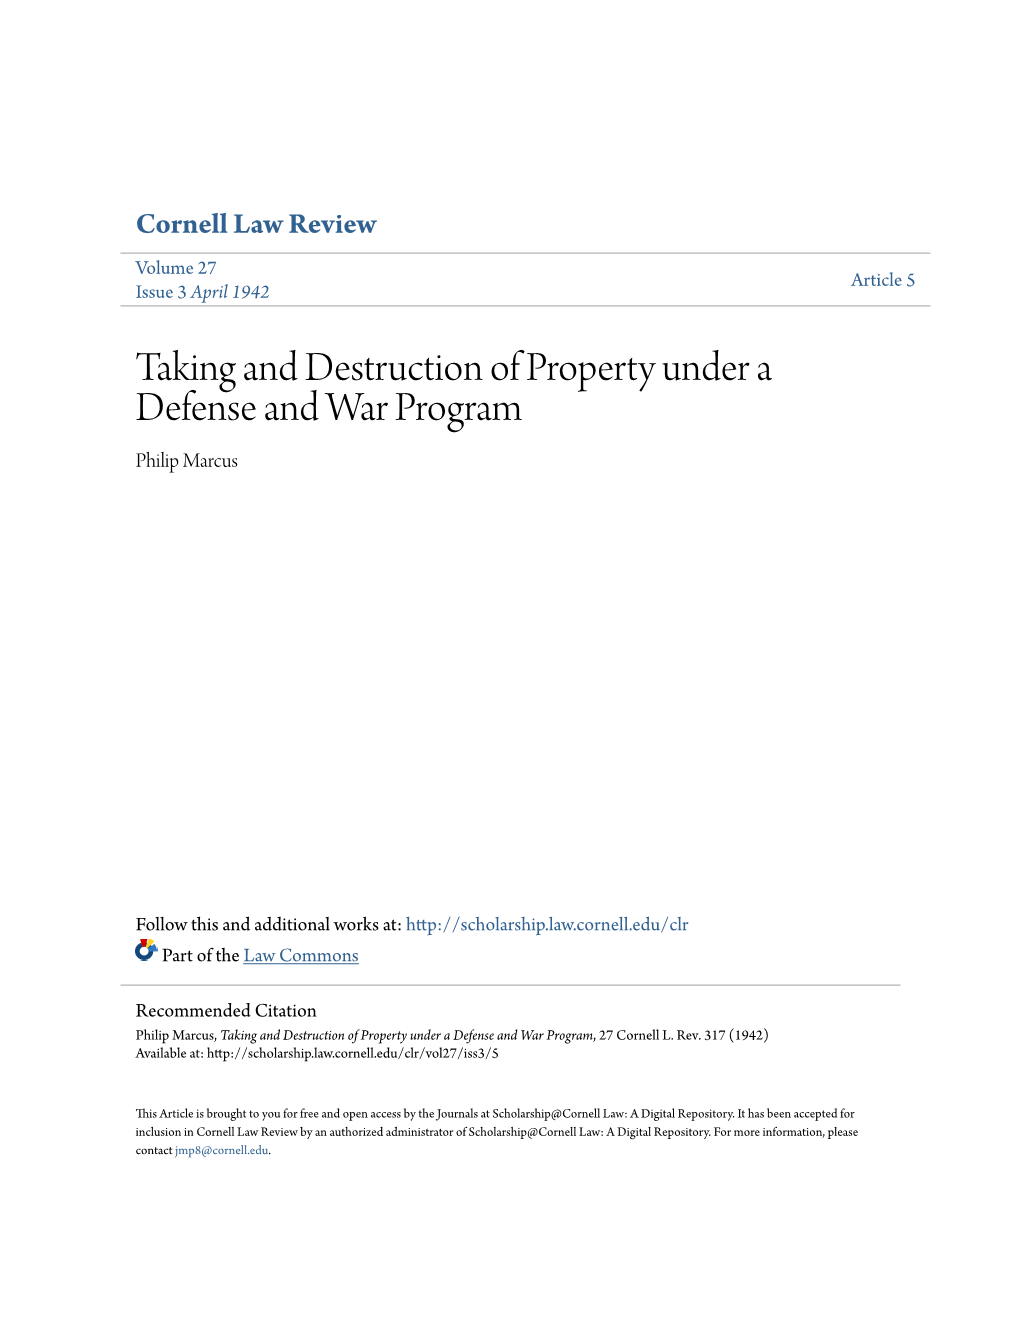 Taking and Destruction of Property Under a Defense and War Program Philip Marcus